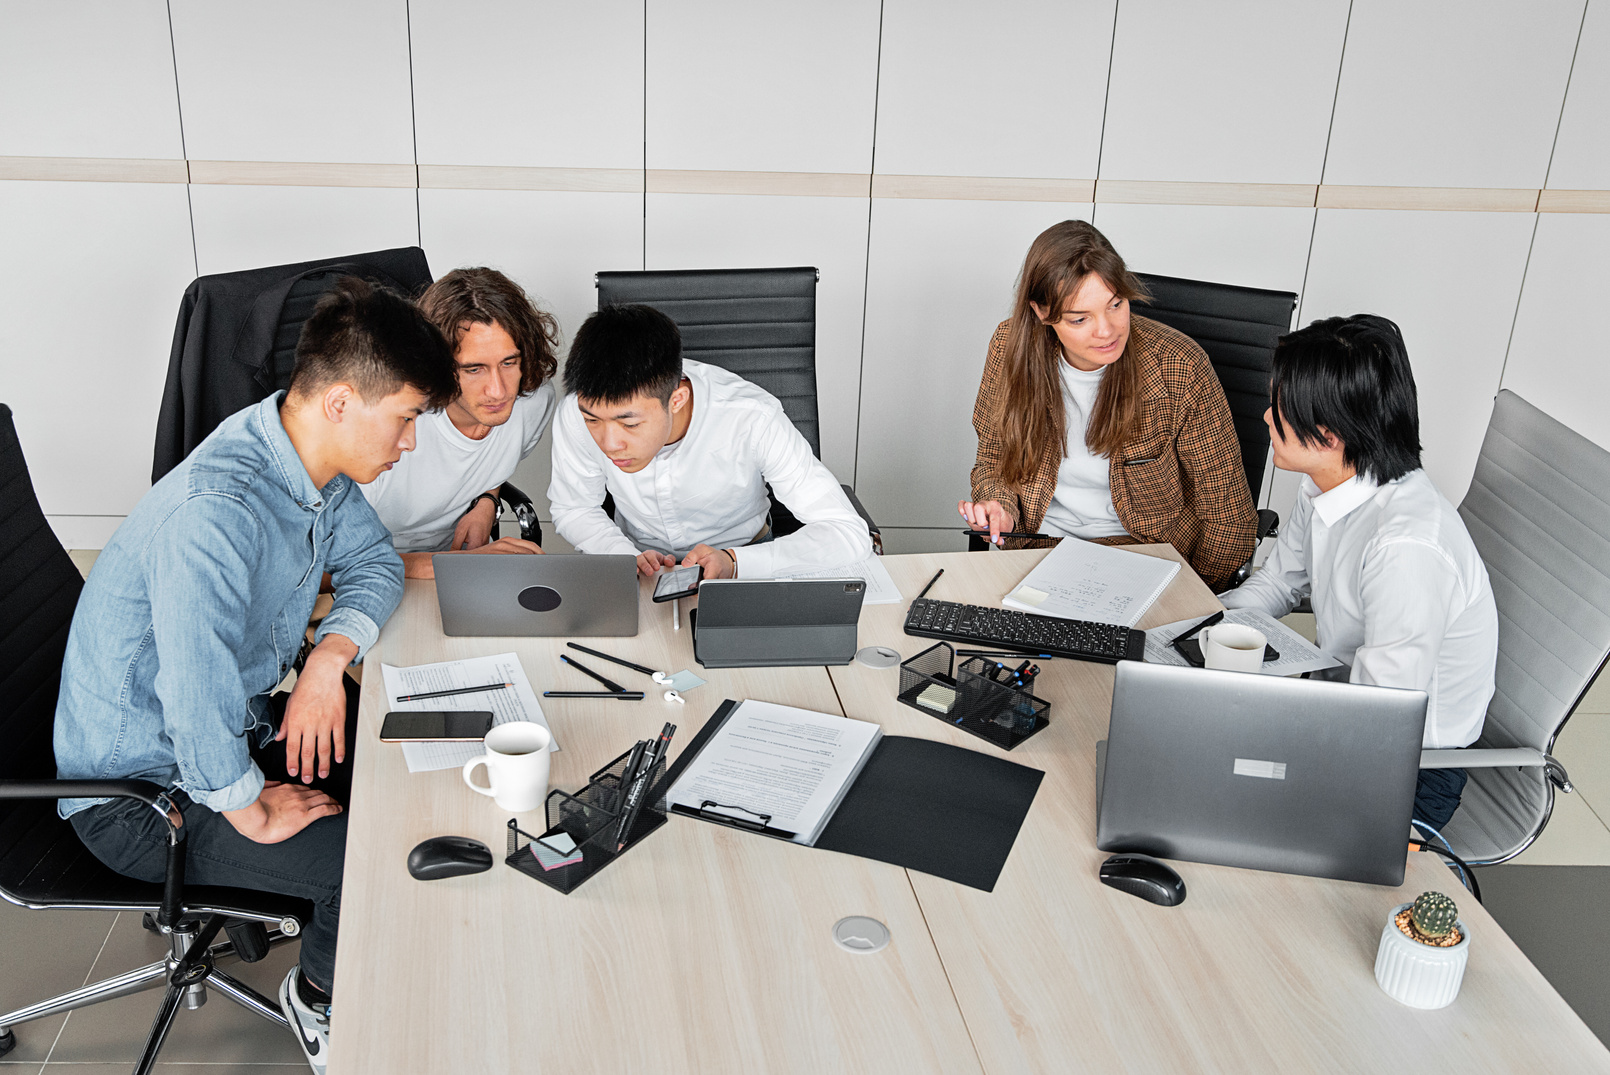 A Group of People Discussing in an Office